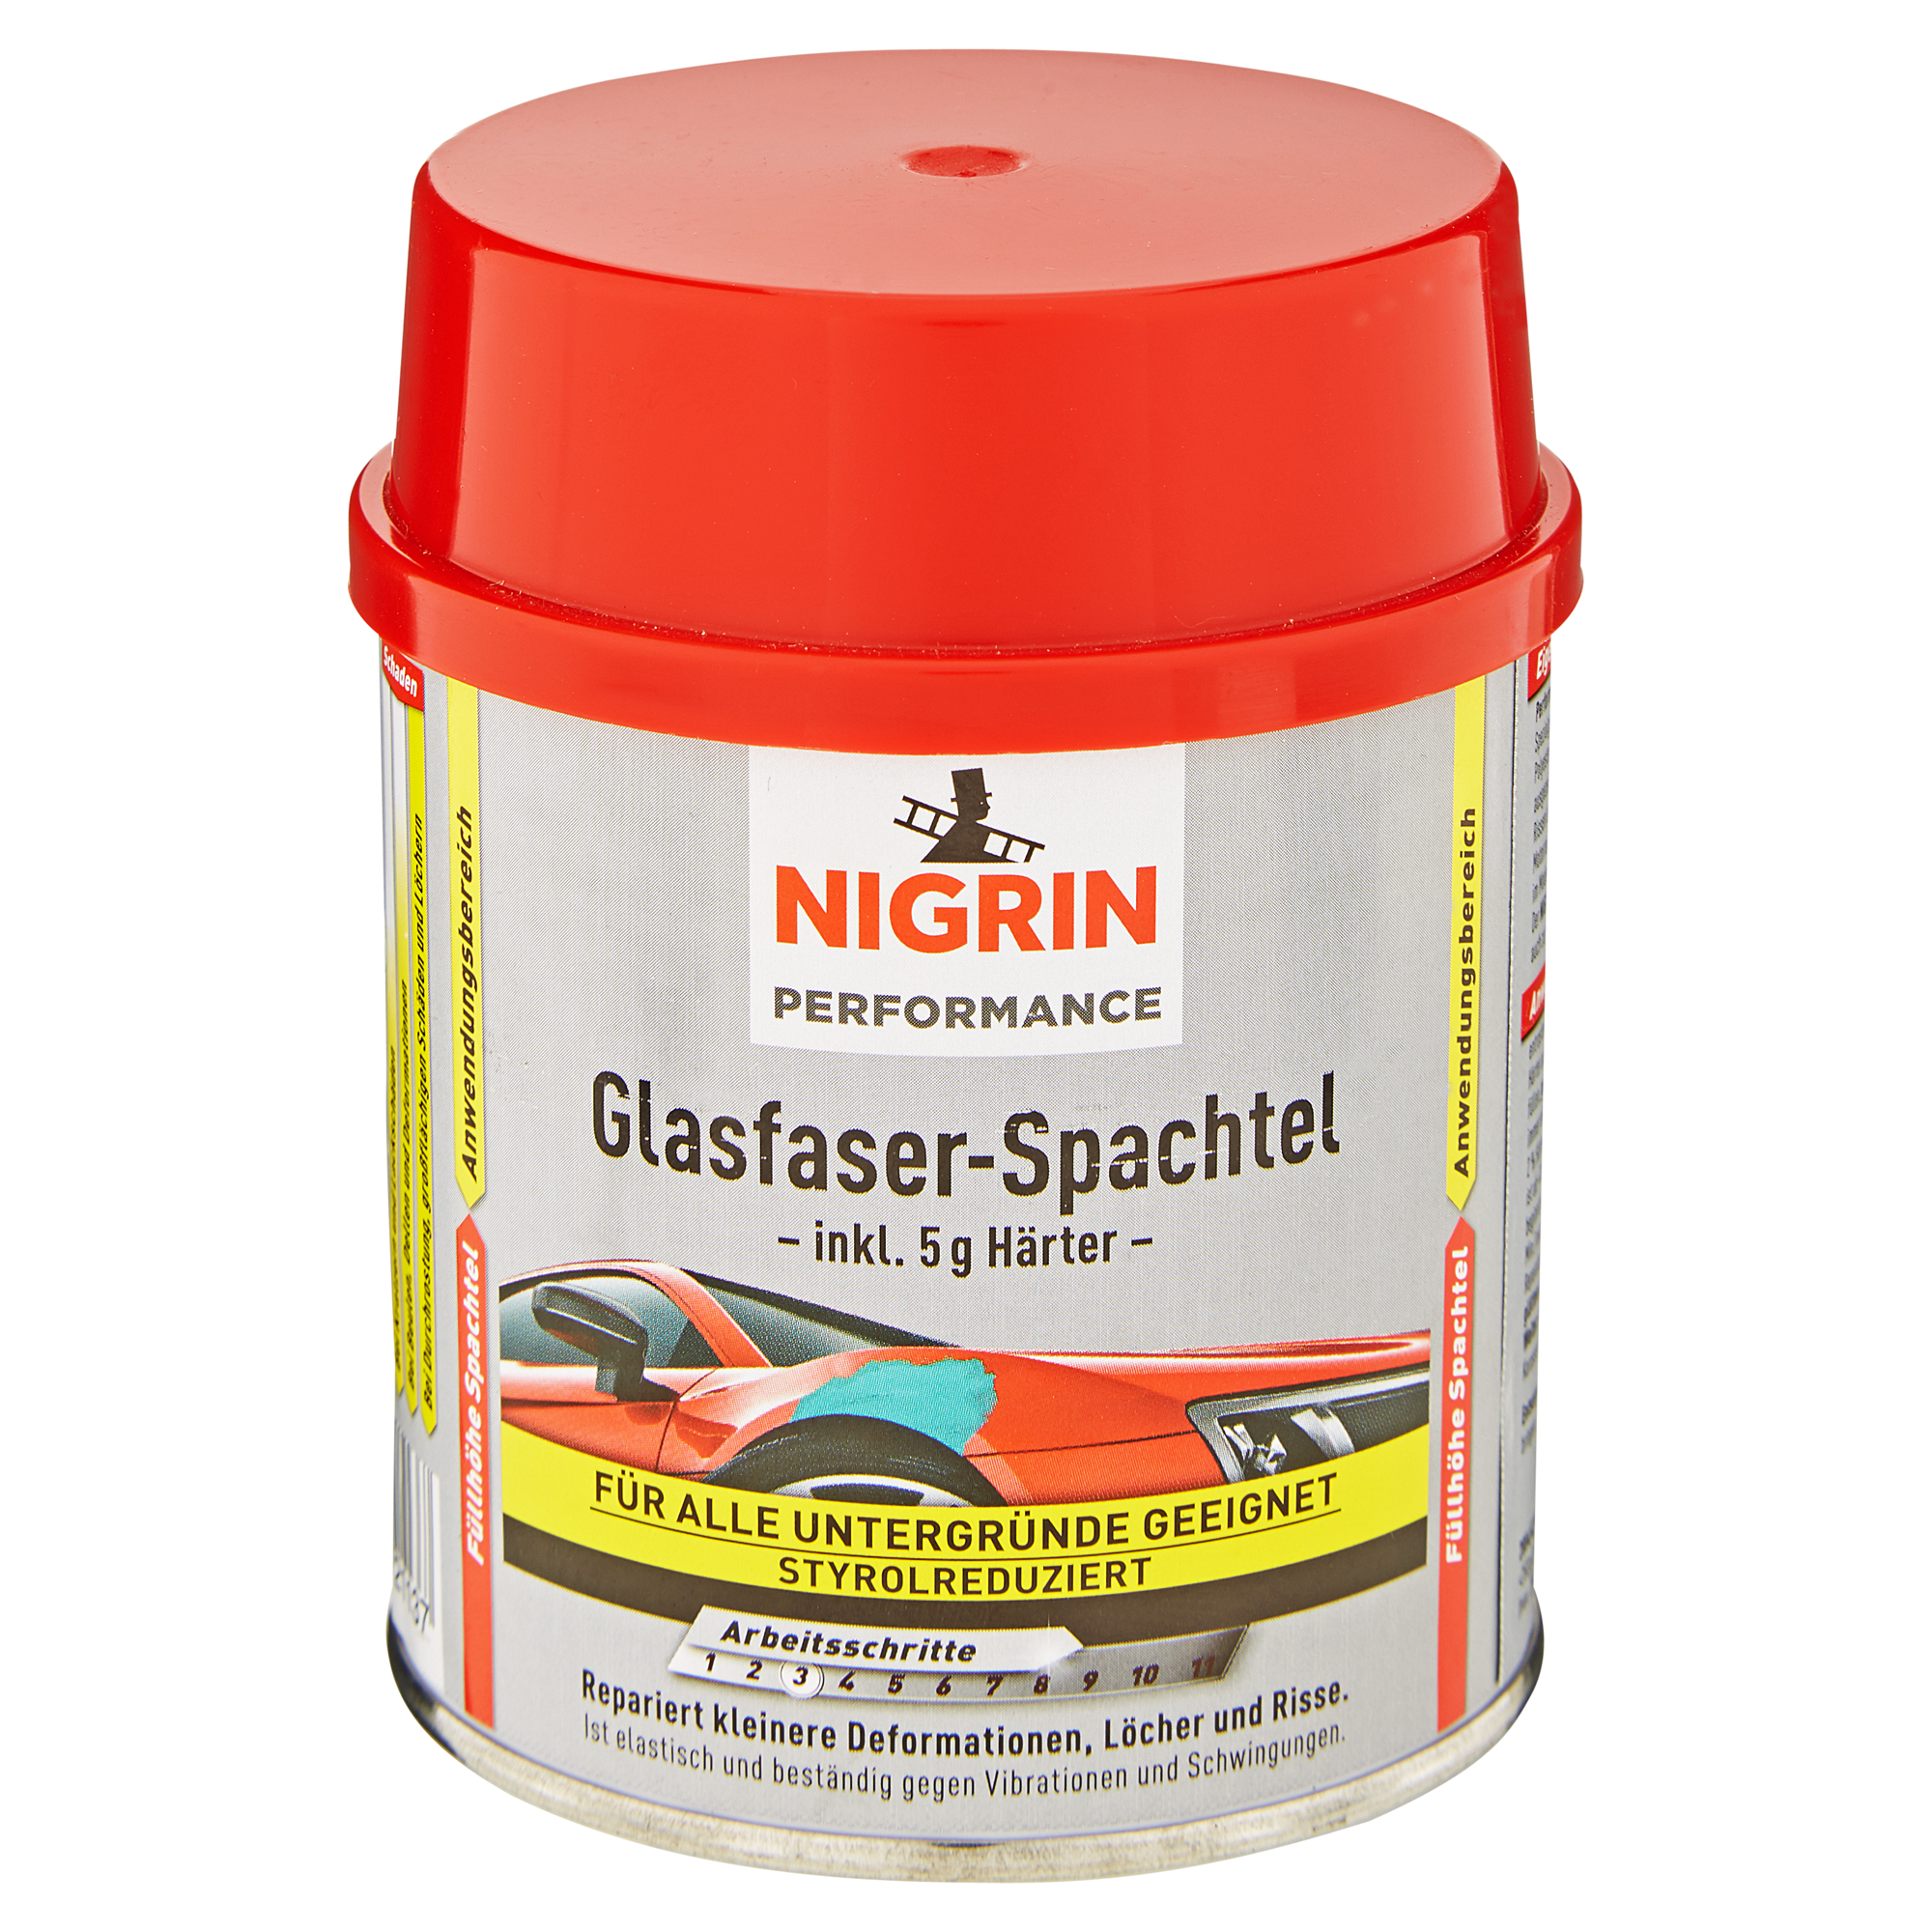 Glasfaserspachtel "Performance" grün 250 g + product picture